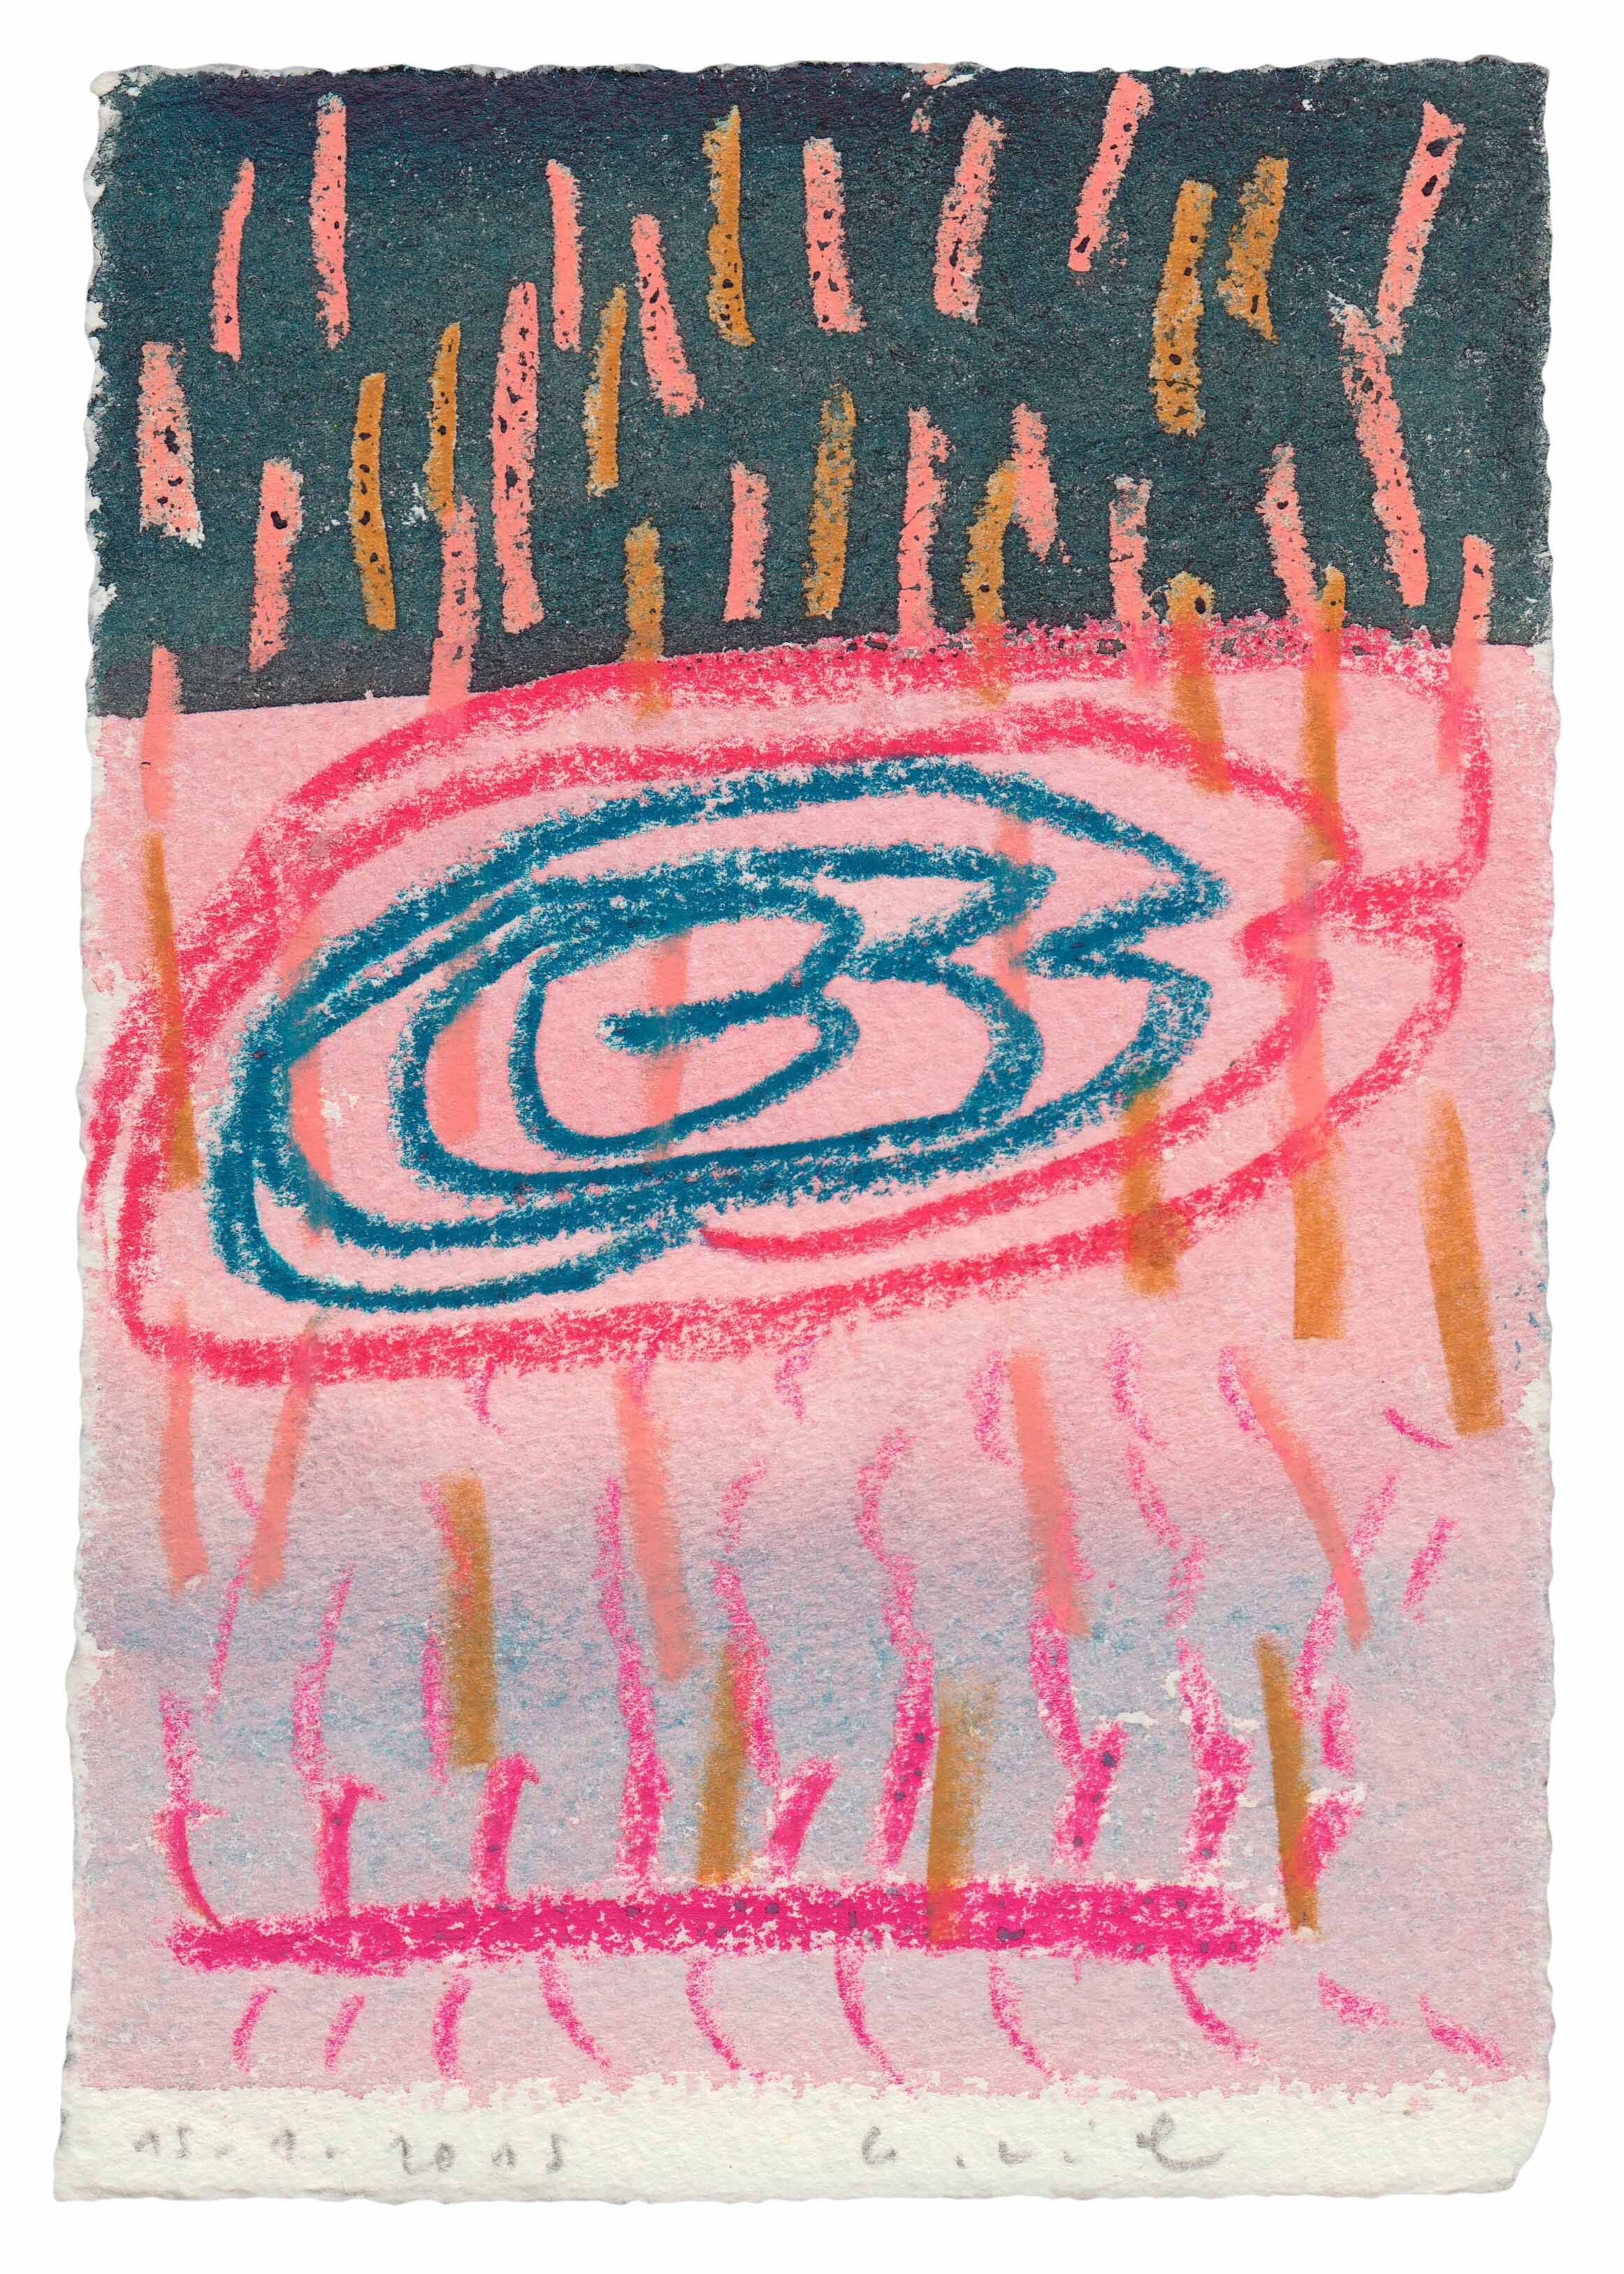  13 × 9 cm, Oil-pastel and Aquarell on Paper, 2015 